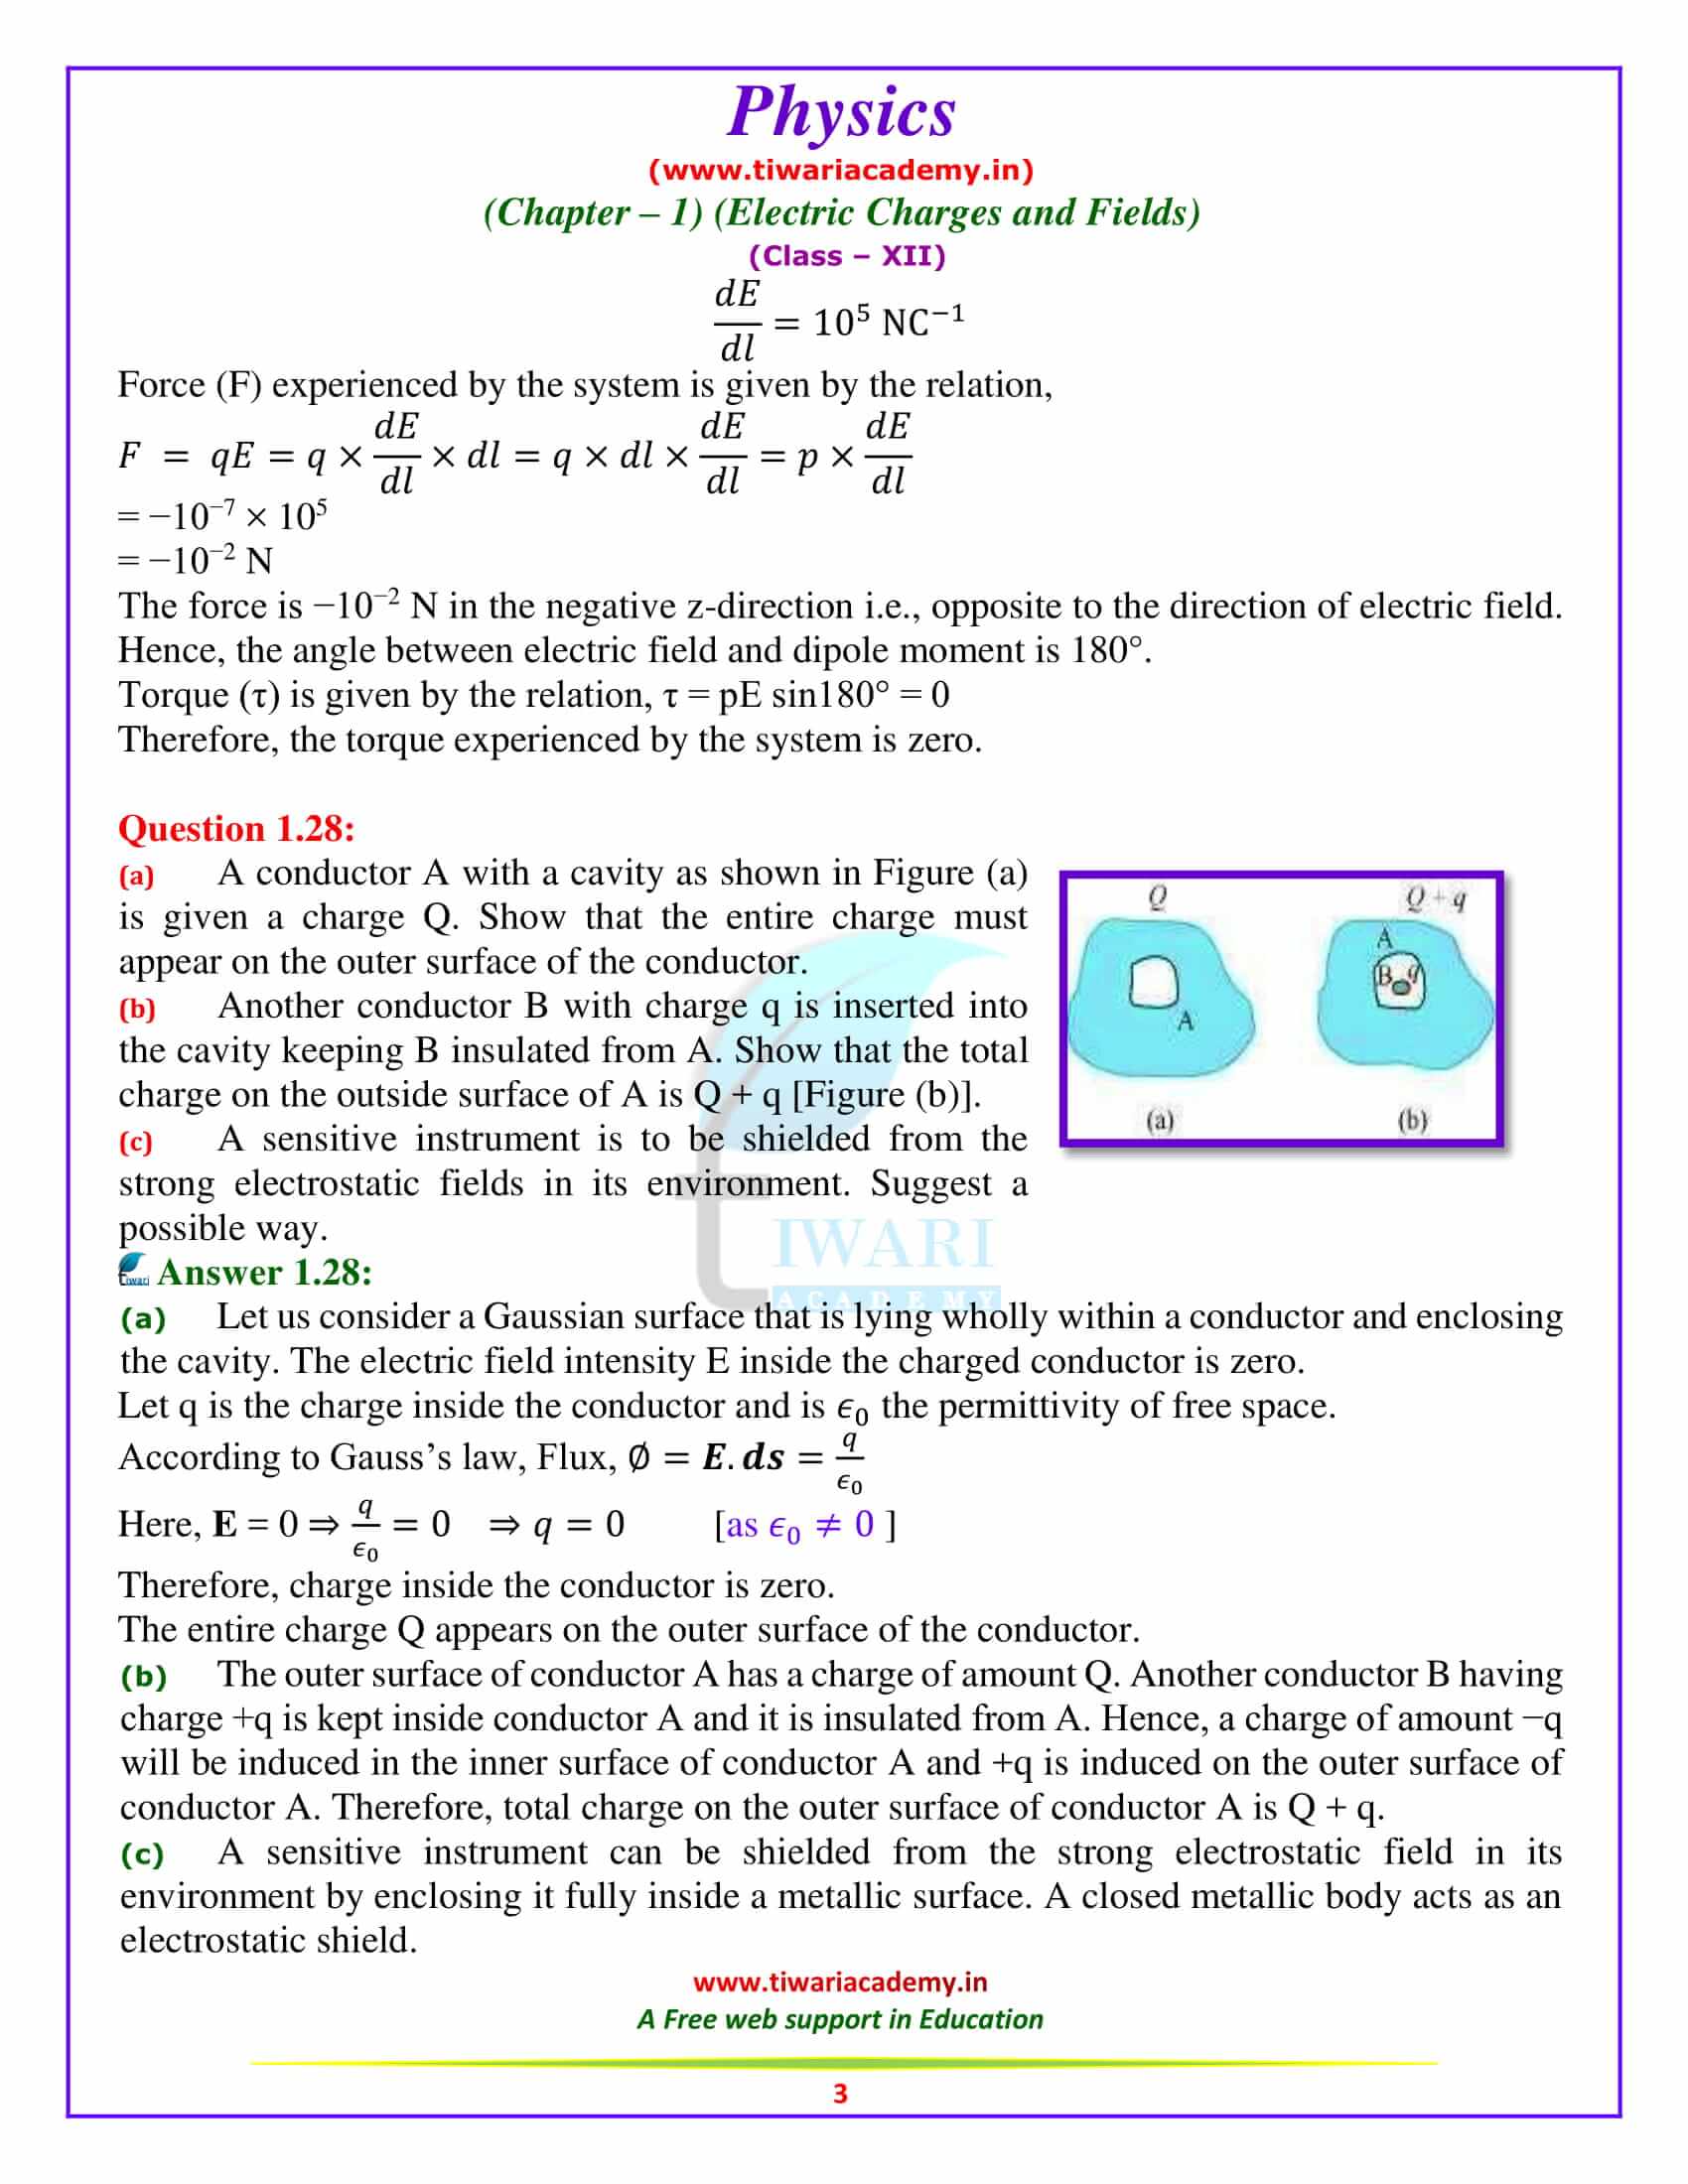 12 Physics chapter 1 Solutions additional exercises in pdf form